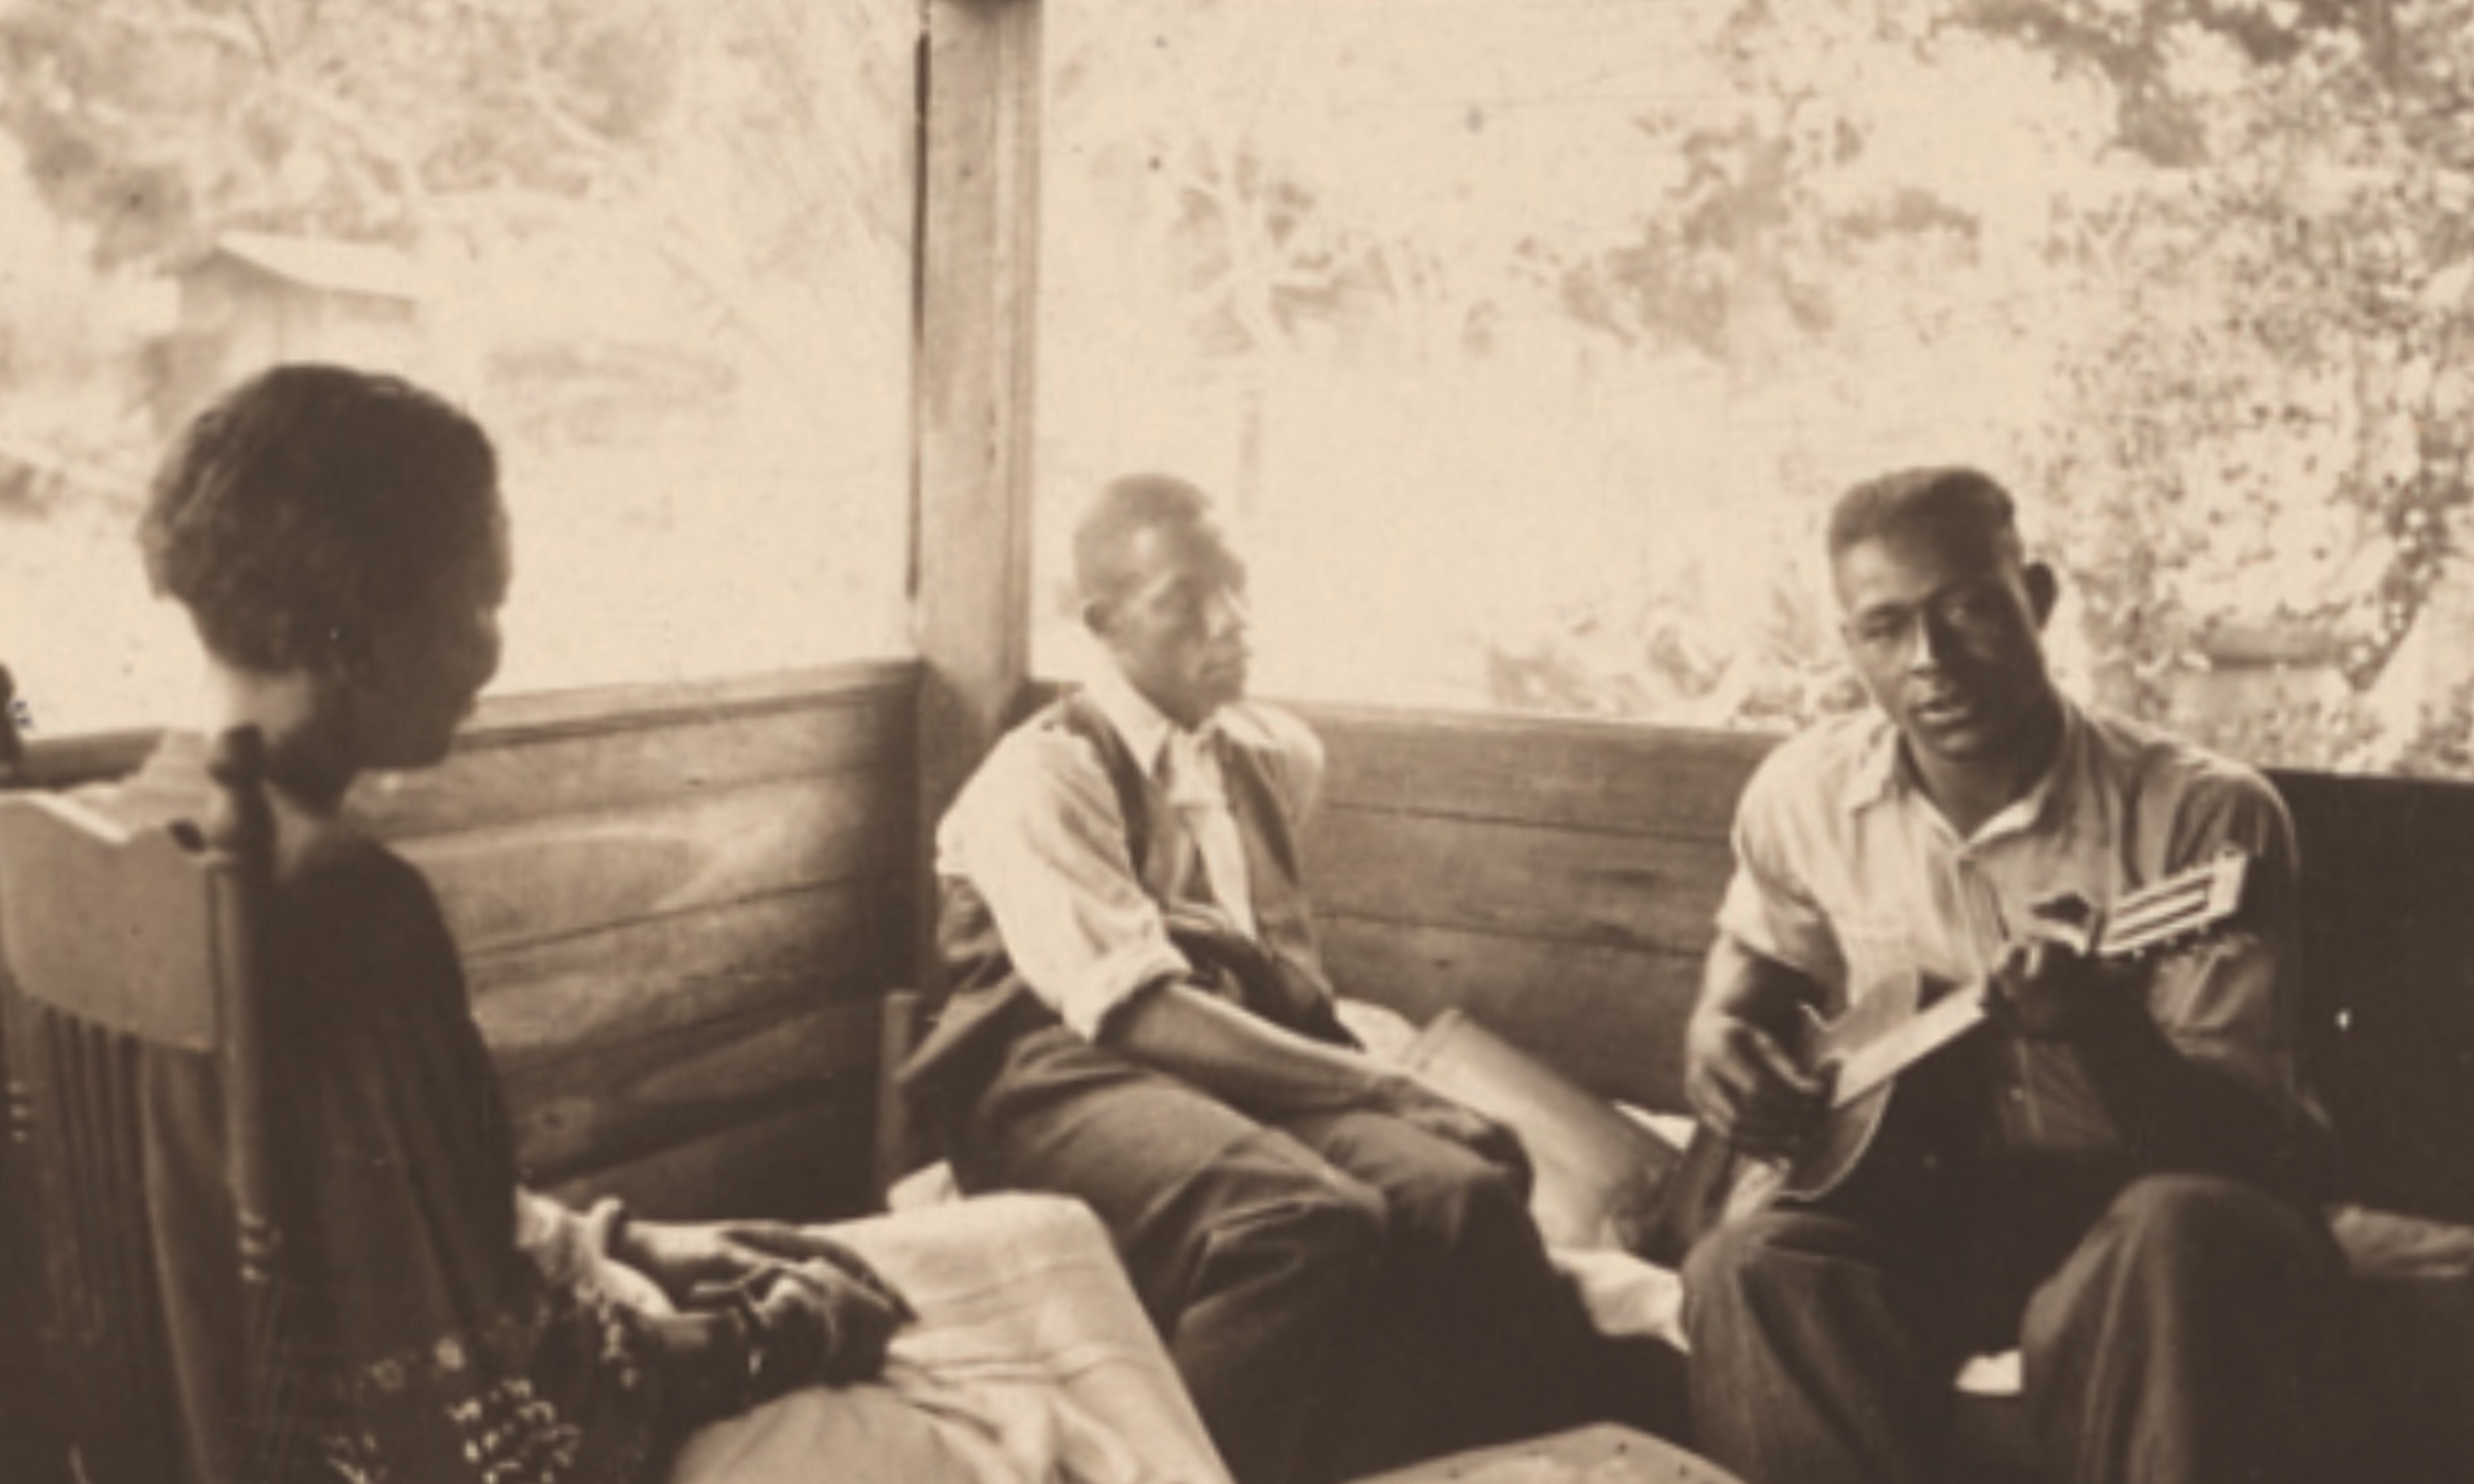 Zora Neale Hurston, Rochelle French, and Gabriel Brown lounging on the porch in Eatonville in 1935